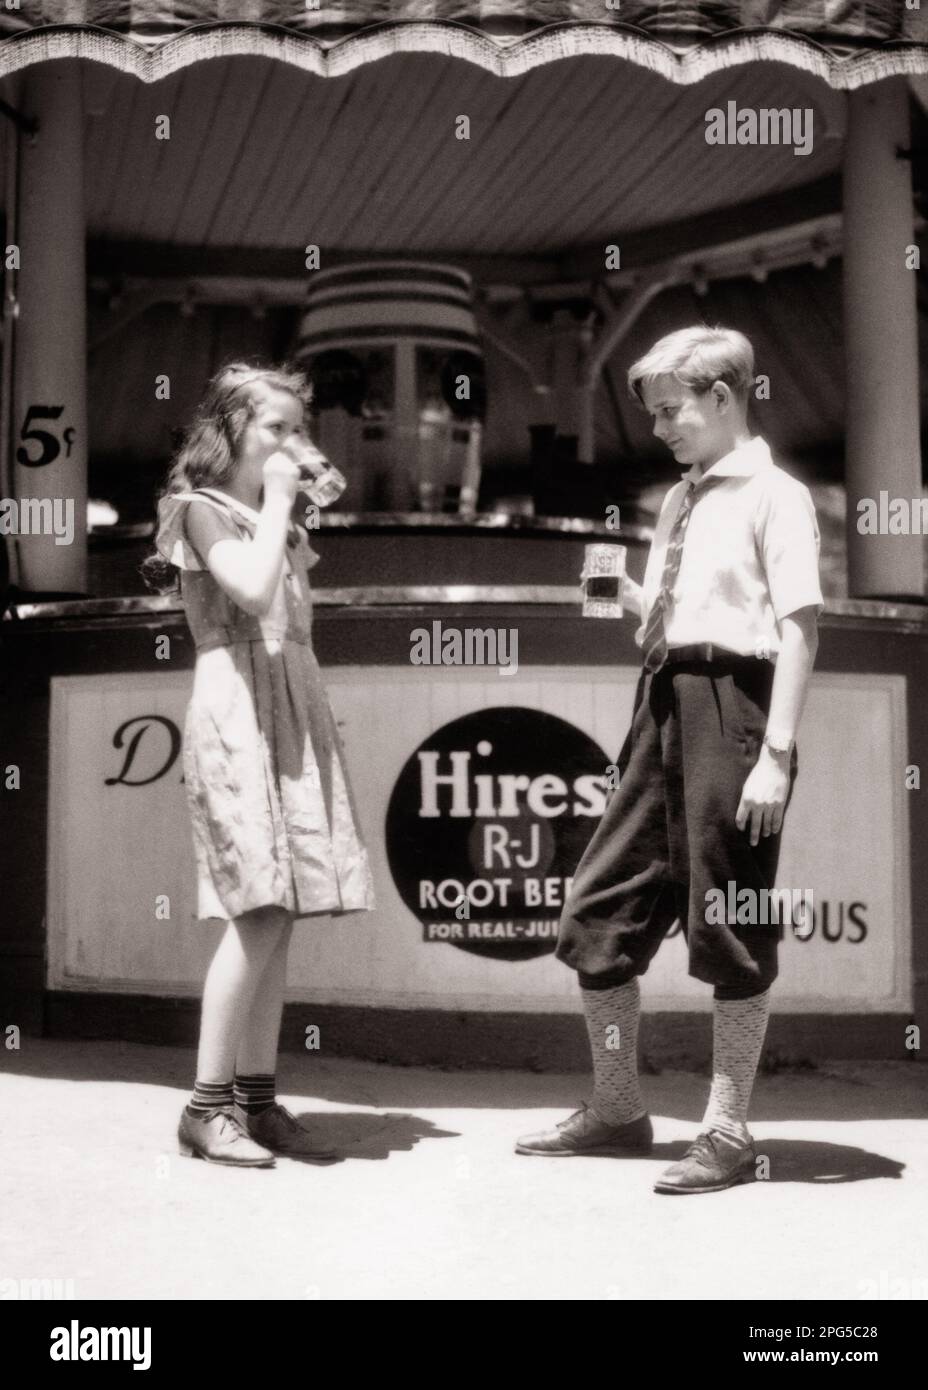 1930s BOY AND GIRL STANDING IN FRONT OF SNACK STAND DRINKING MUGS OF 5 CENT ROOT BEERS SHOWING BRAND NAME HIRES - f7240 HAR001 HARS STYLE TEAMWORK SNACK ABSTRACT PLEASED JOY LIFESTYLE FEMALES BROTHERS SHOWING COPY SPACE FRIENDSHIP FULL-LENGTH PERSONS MALES SIBLINGS SISTERS B&W SUMMERTIME HAPPINESS CHEERFUL ADVENTURE BEVERAGE NAME AND BRAND CENT EXCITEMENT EXTERIOR PRIDE SIBLING SMILES SOFT DRINK CONNECTION BEERS CONCEPTUAL JOYFUL MUGS ROOT STYLISH SUPPORT 5 CENTS GROWTH PRE-TEEN PRE-TEEN BOY PRE-TEEN GIRL SEASON THIRSTY TOGETHERNESS BLACK AND WHITE CAUCASIAN ETHNICITY HAR001 OLD FASHIONED Stock Photo